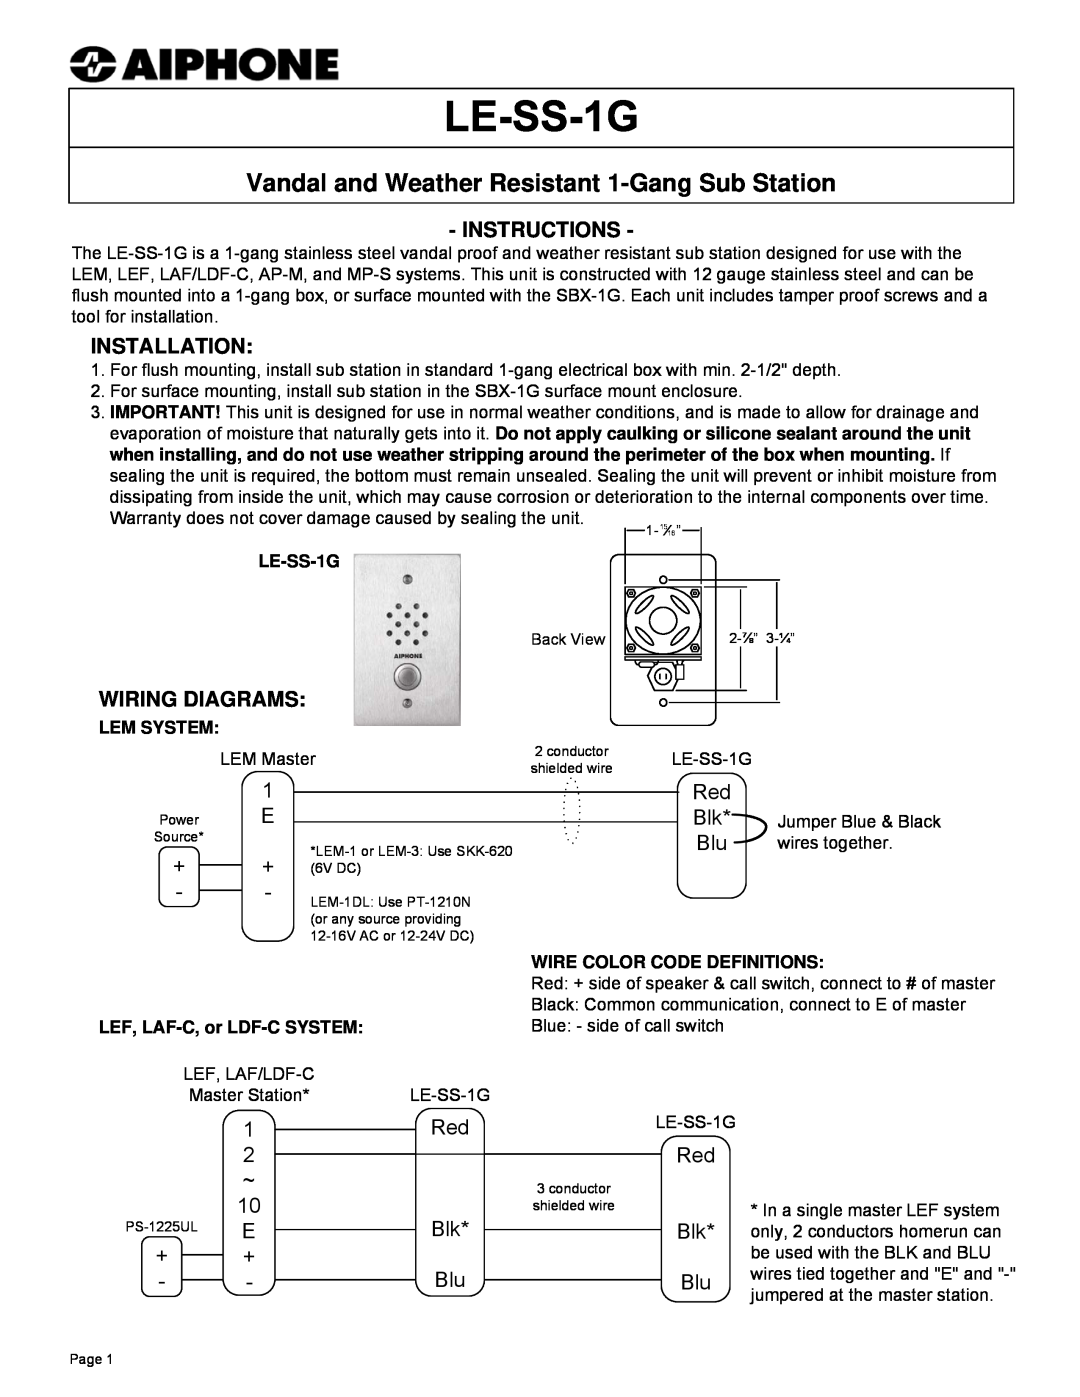 Aiphone LE-SS-1G warranty Instructions, Installation, Wiring Diagrams, Vandal and Weather Resistant 1-Gang Sub Station 